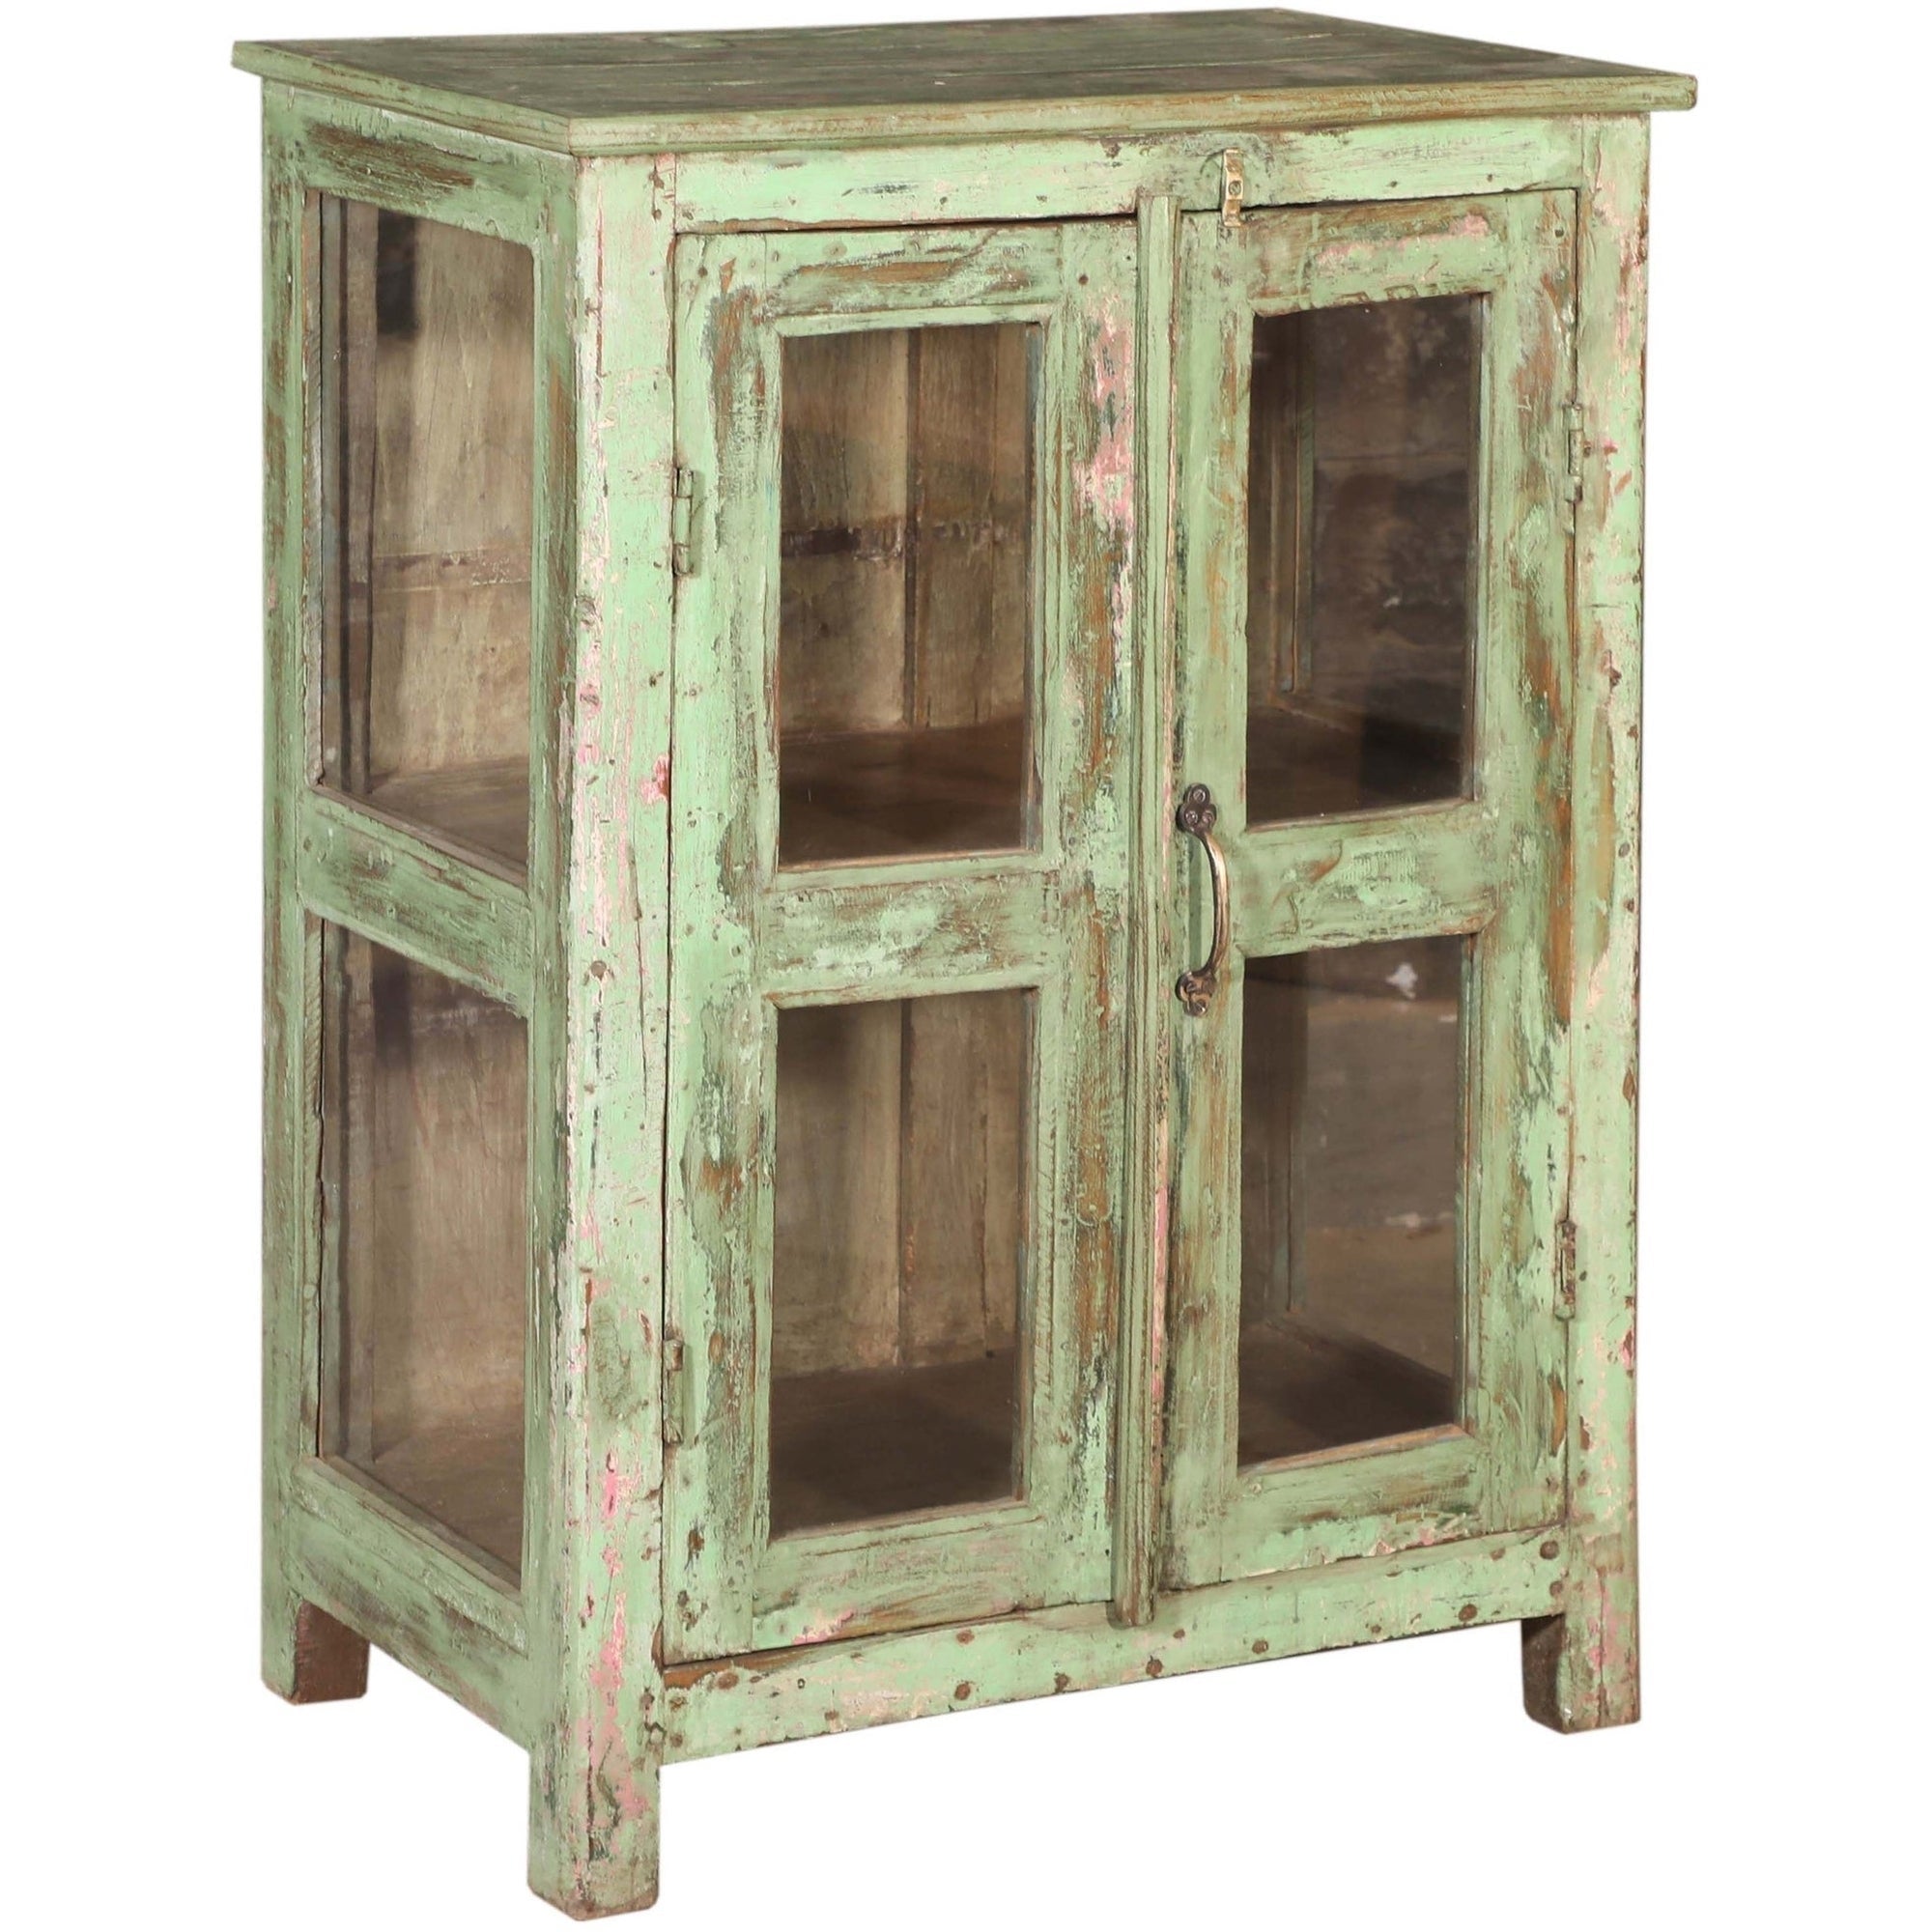 RM-059765, Wooden Cabinet With Glass, Teak, 50+Yrs Old - iDekor8